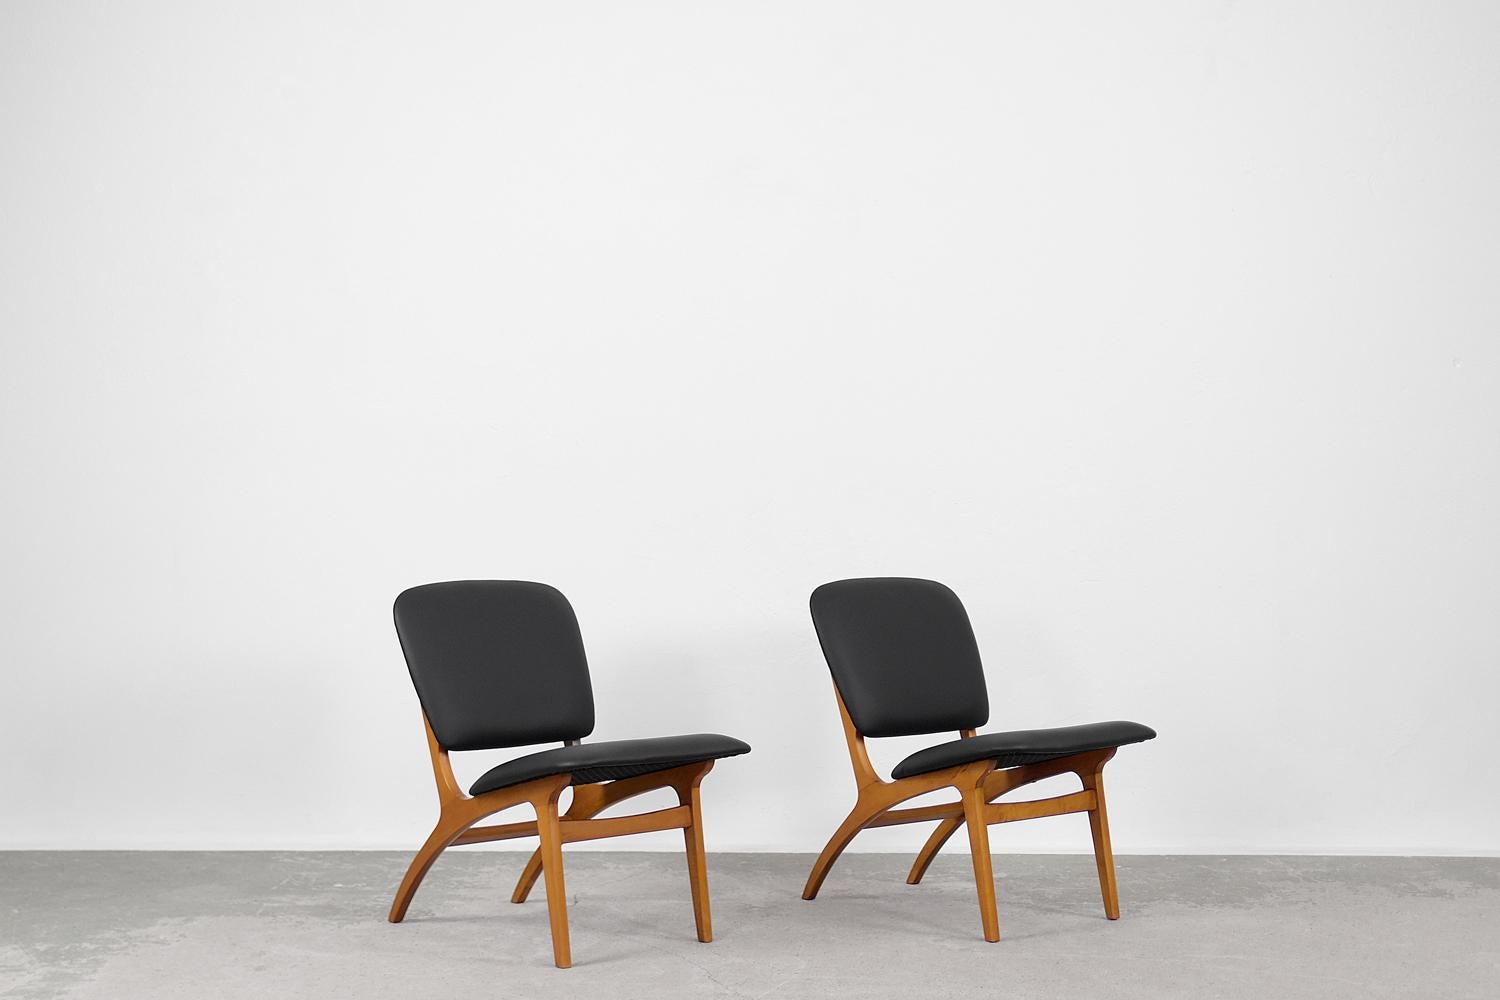 This pair of modernist Jylland armchairs was produced by Jio Möbler in 1953. The frame is made of varnished beech wood. Slender legs gently merge into a subtly tilted backrest. The seat and backrest are upholstered with high-quality black synthetic